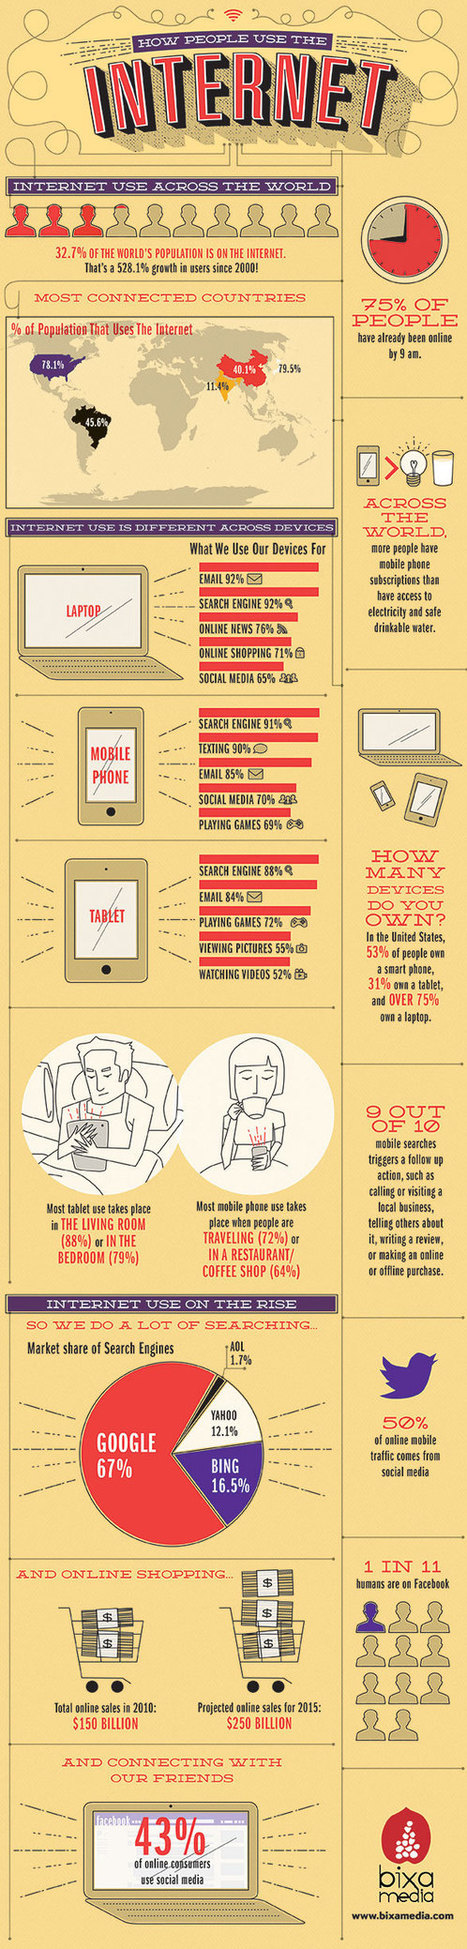 How People Use the Internet [INFOGRAPHIC] | A New Society, a new education! | Scoop.it